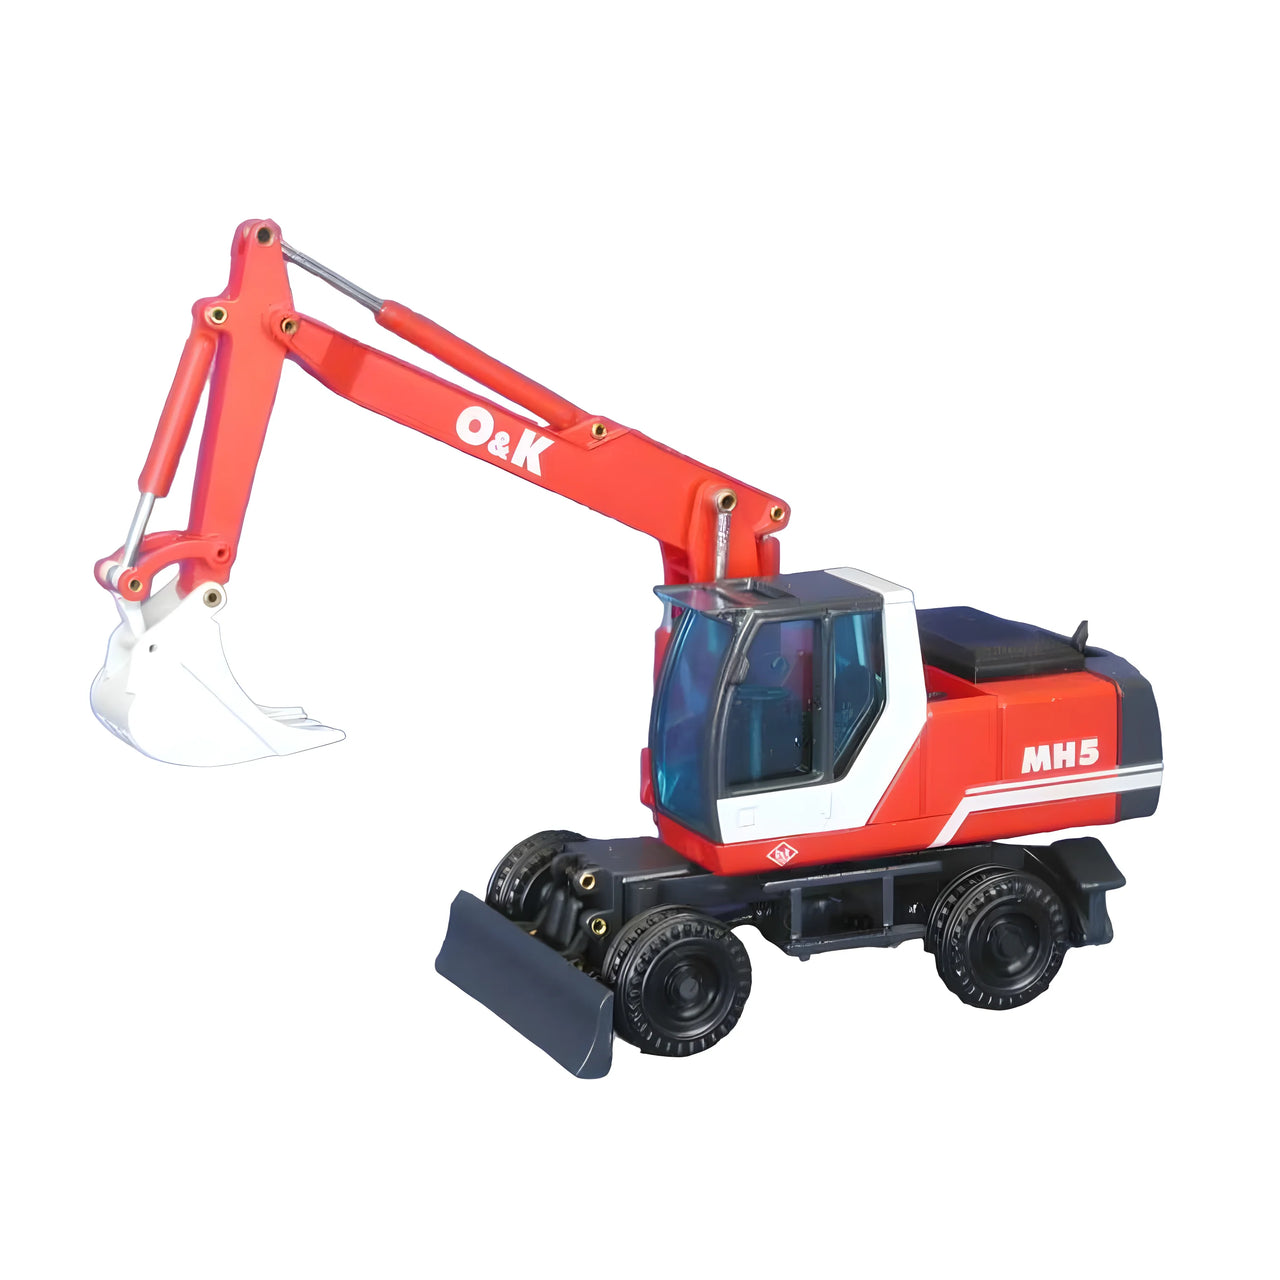 457 O&amp;K MH5 Wheeled Excavator 1:50 Scale (Discontinued Model)